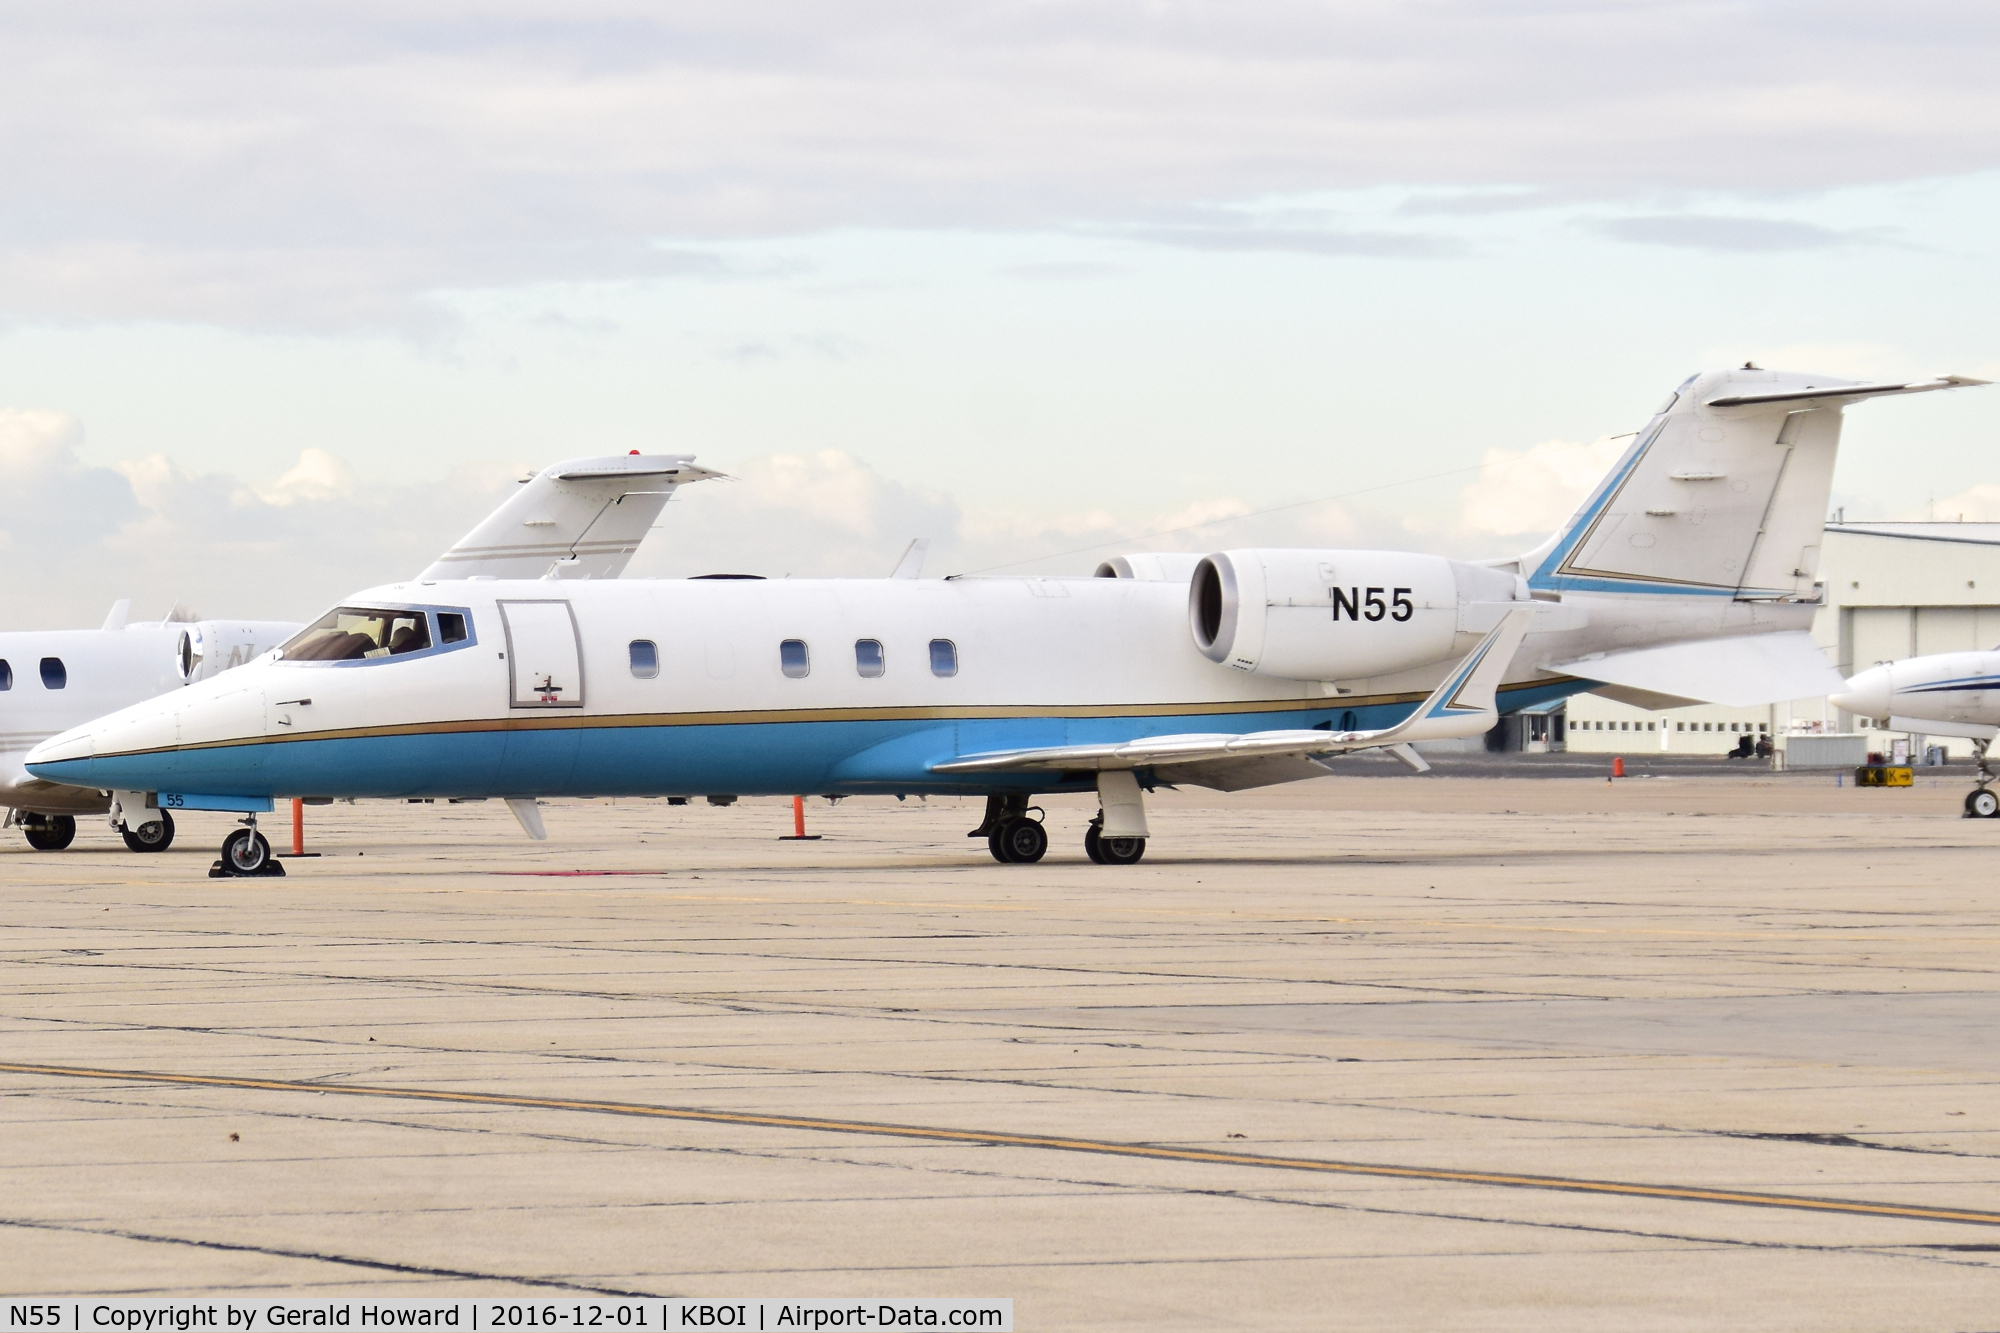 N55, 1993 Learjet Inc 60 C/N 013, Used for checking navigation systems.